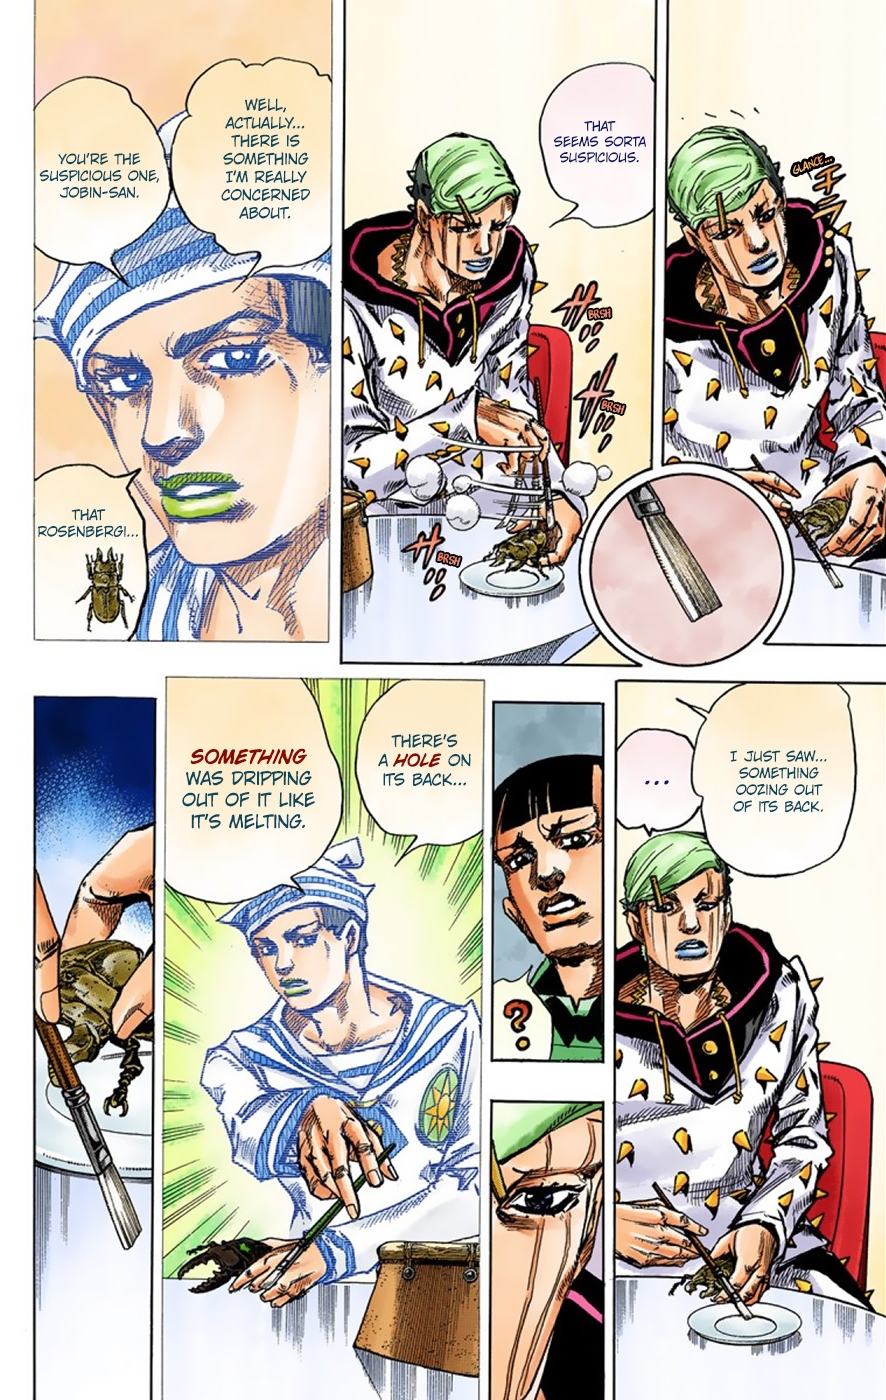 JoJo's Bizarre Adventure Part 8 JoJolion [Official Colored] Vol. 9 Ch. 37 Every Day is a Summer Vacation Part 4